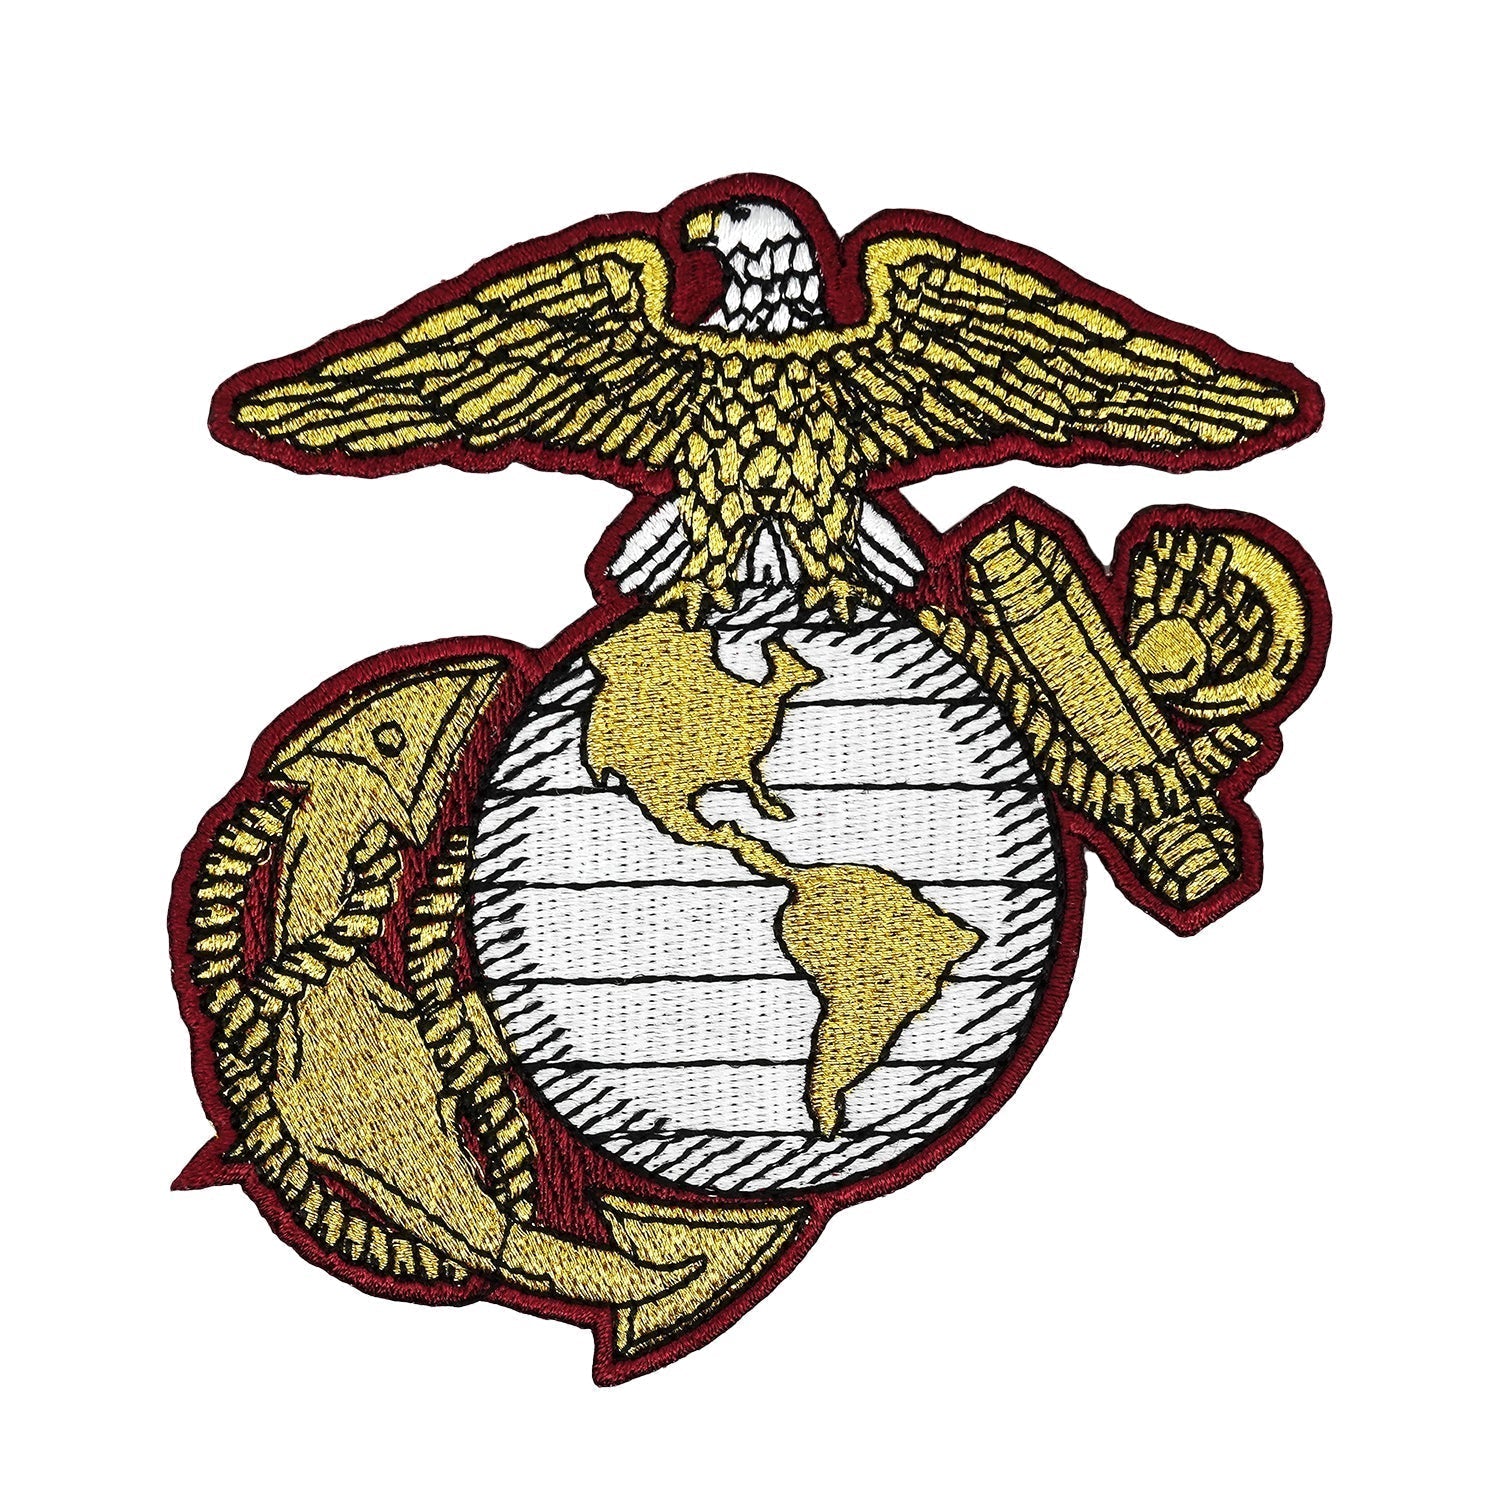 USMC Patch, 3.5 inch Marine Corps Eagle Globe and Anchor Ega Patch Made in USA